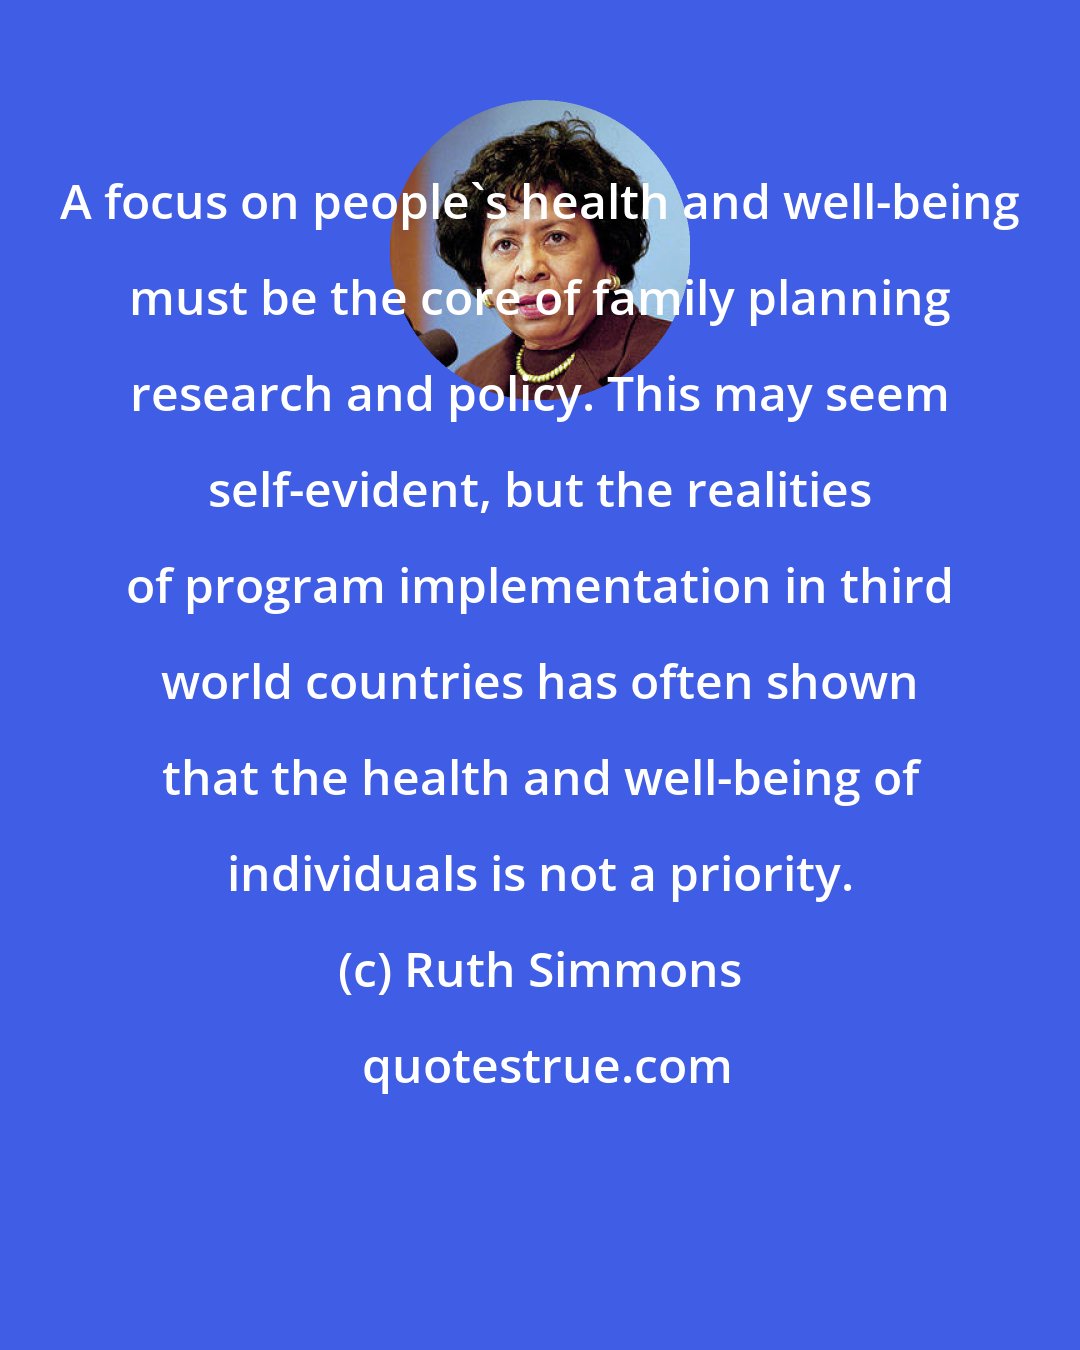 Ruth Simmons: A focus on people's health and well-being must be the core of family planning research and policy. This may seem self-evident, but the realities of program implementation in third world countries has often shown that the health and well-being of individuals is not a priority.